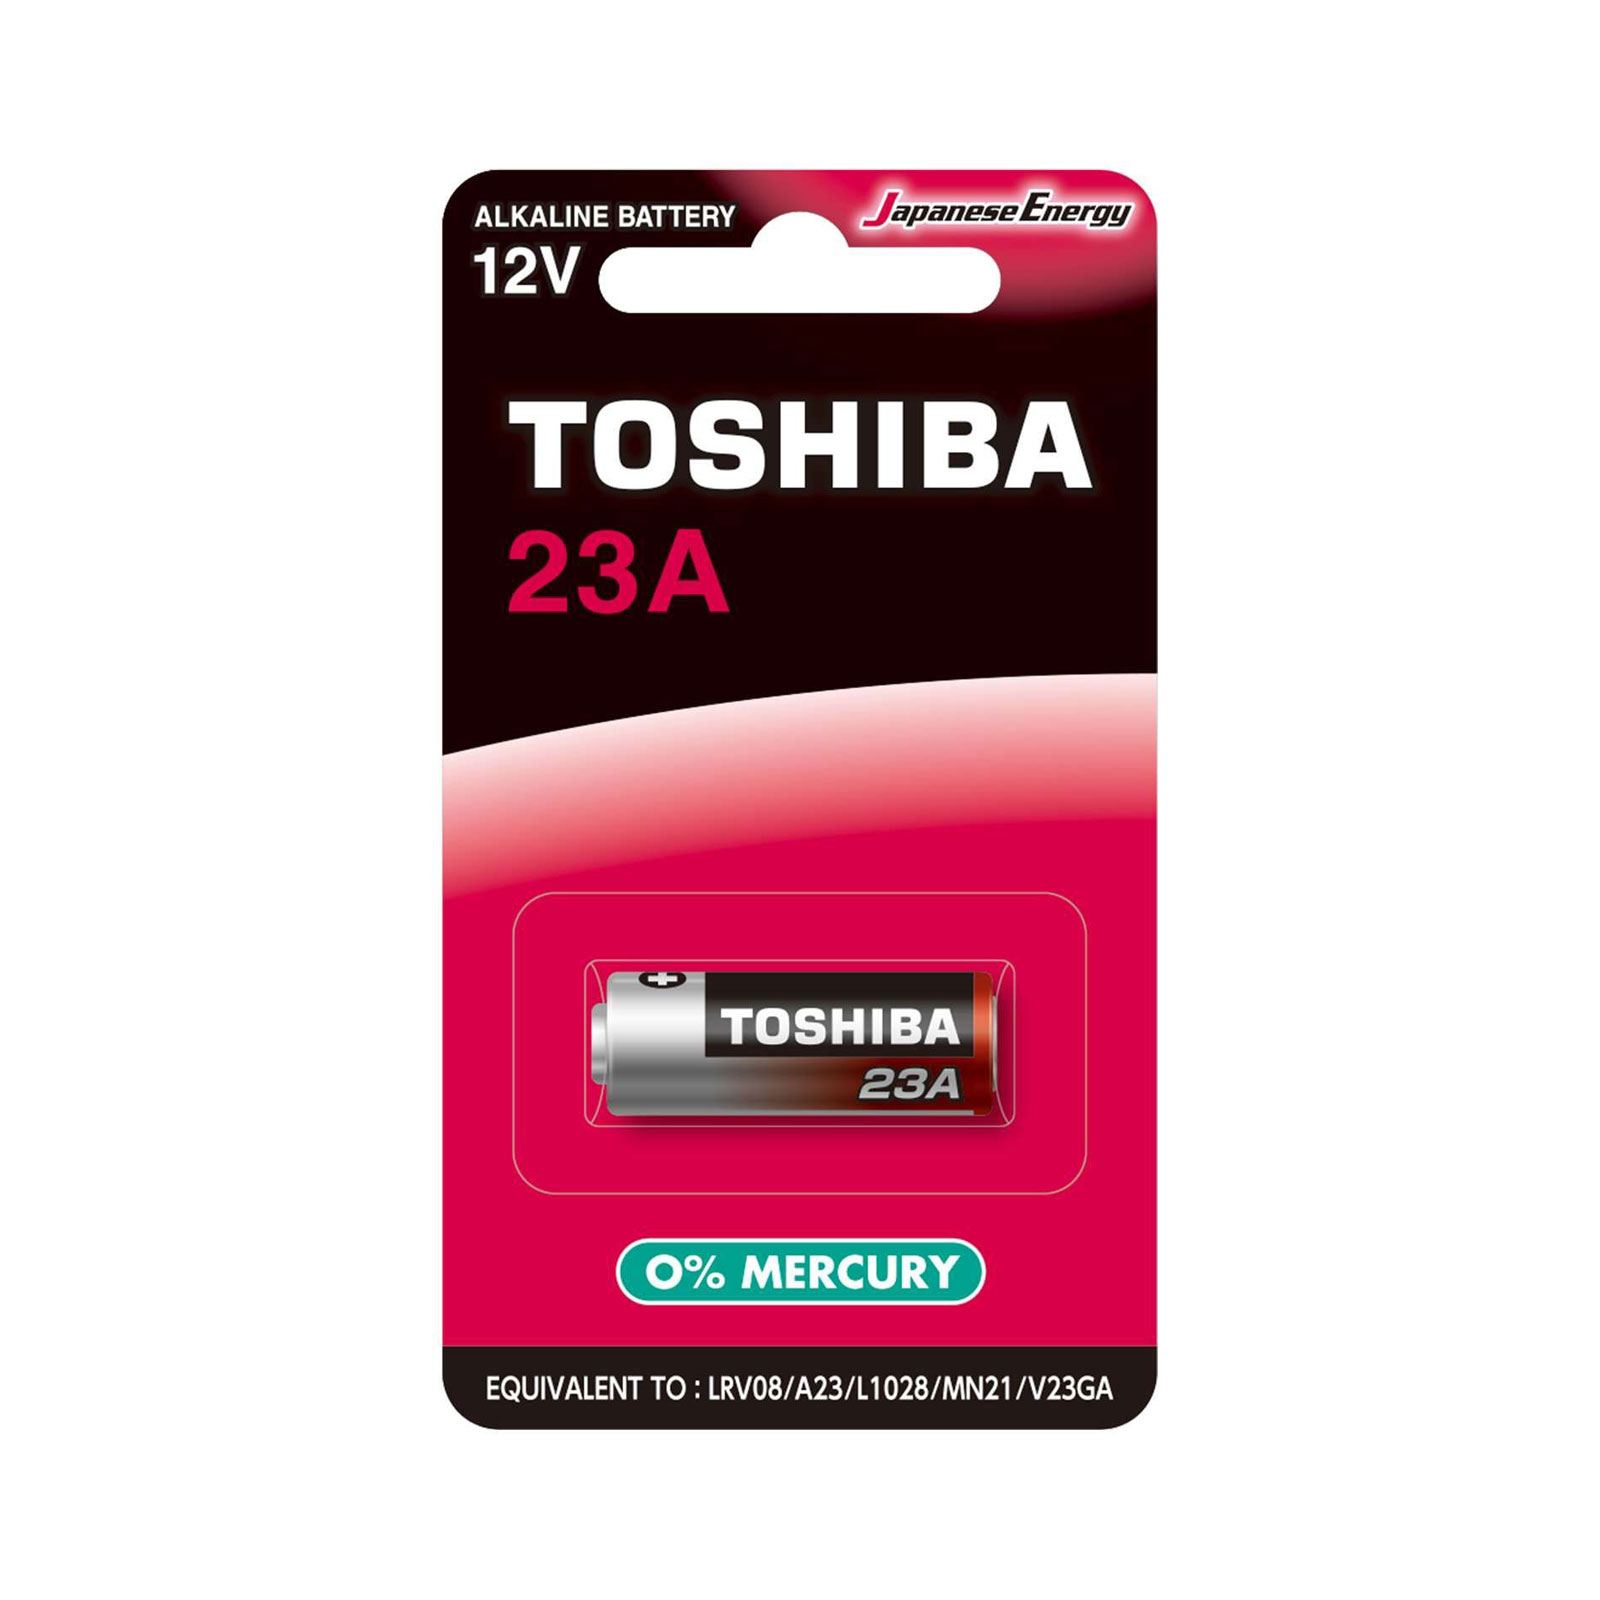 TOSHIBA BATTERY 23A - PACK OF 1